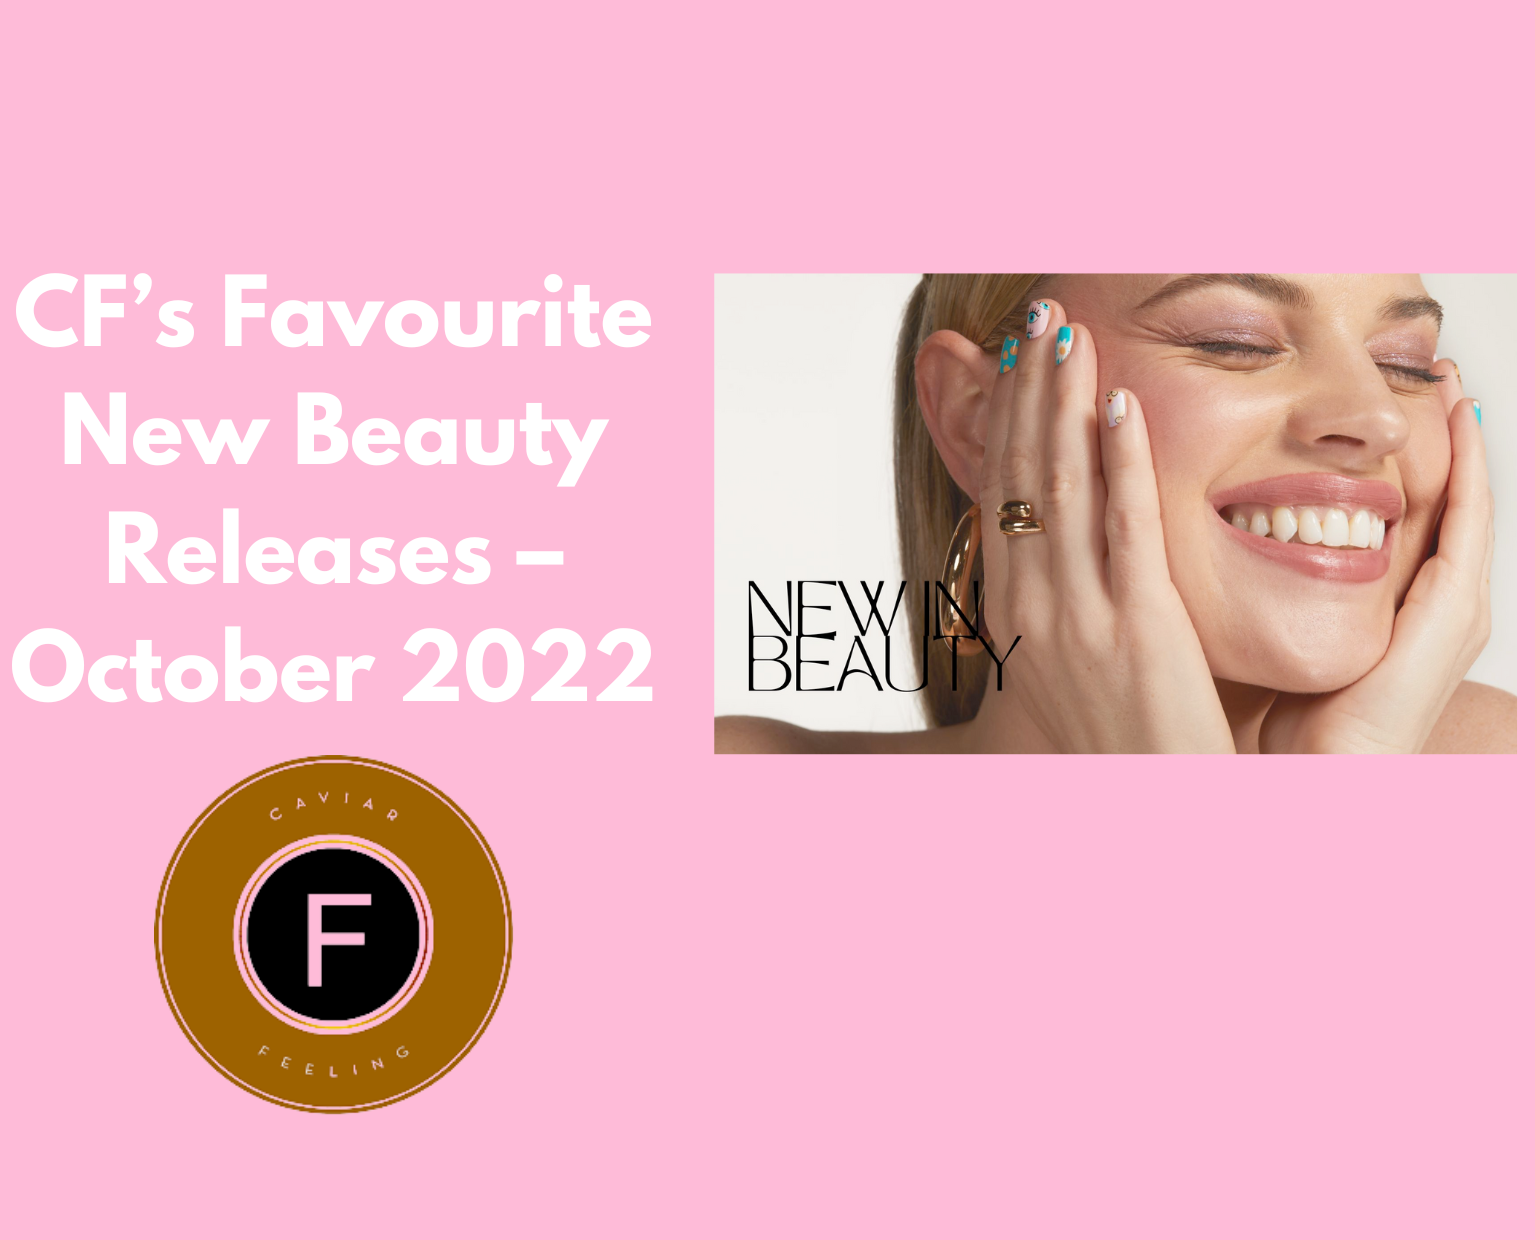 CF’s Favourite New Beauty Releases – October 2022